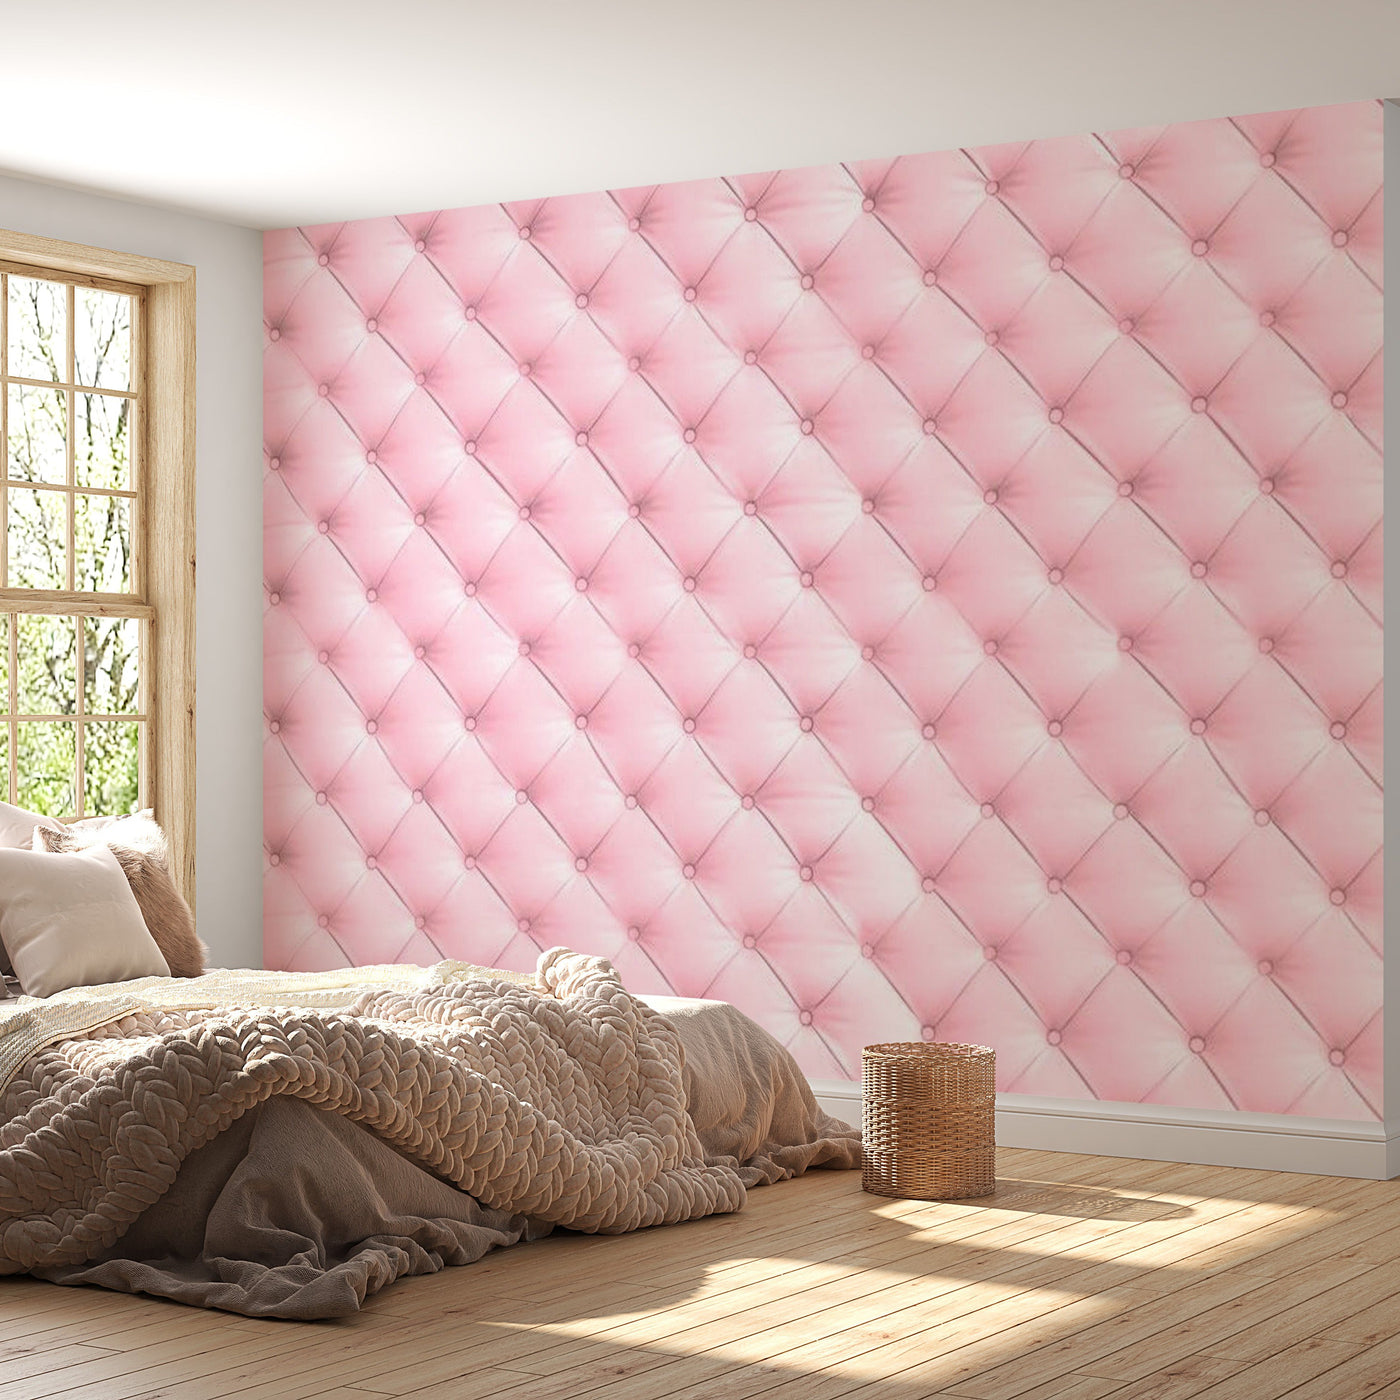 Peel & Stick Wall Mural - Pink Chesterfield Pattern - Removable Wall Decals